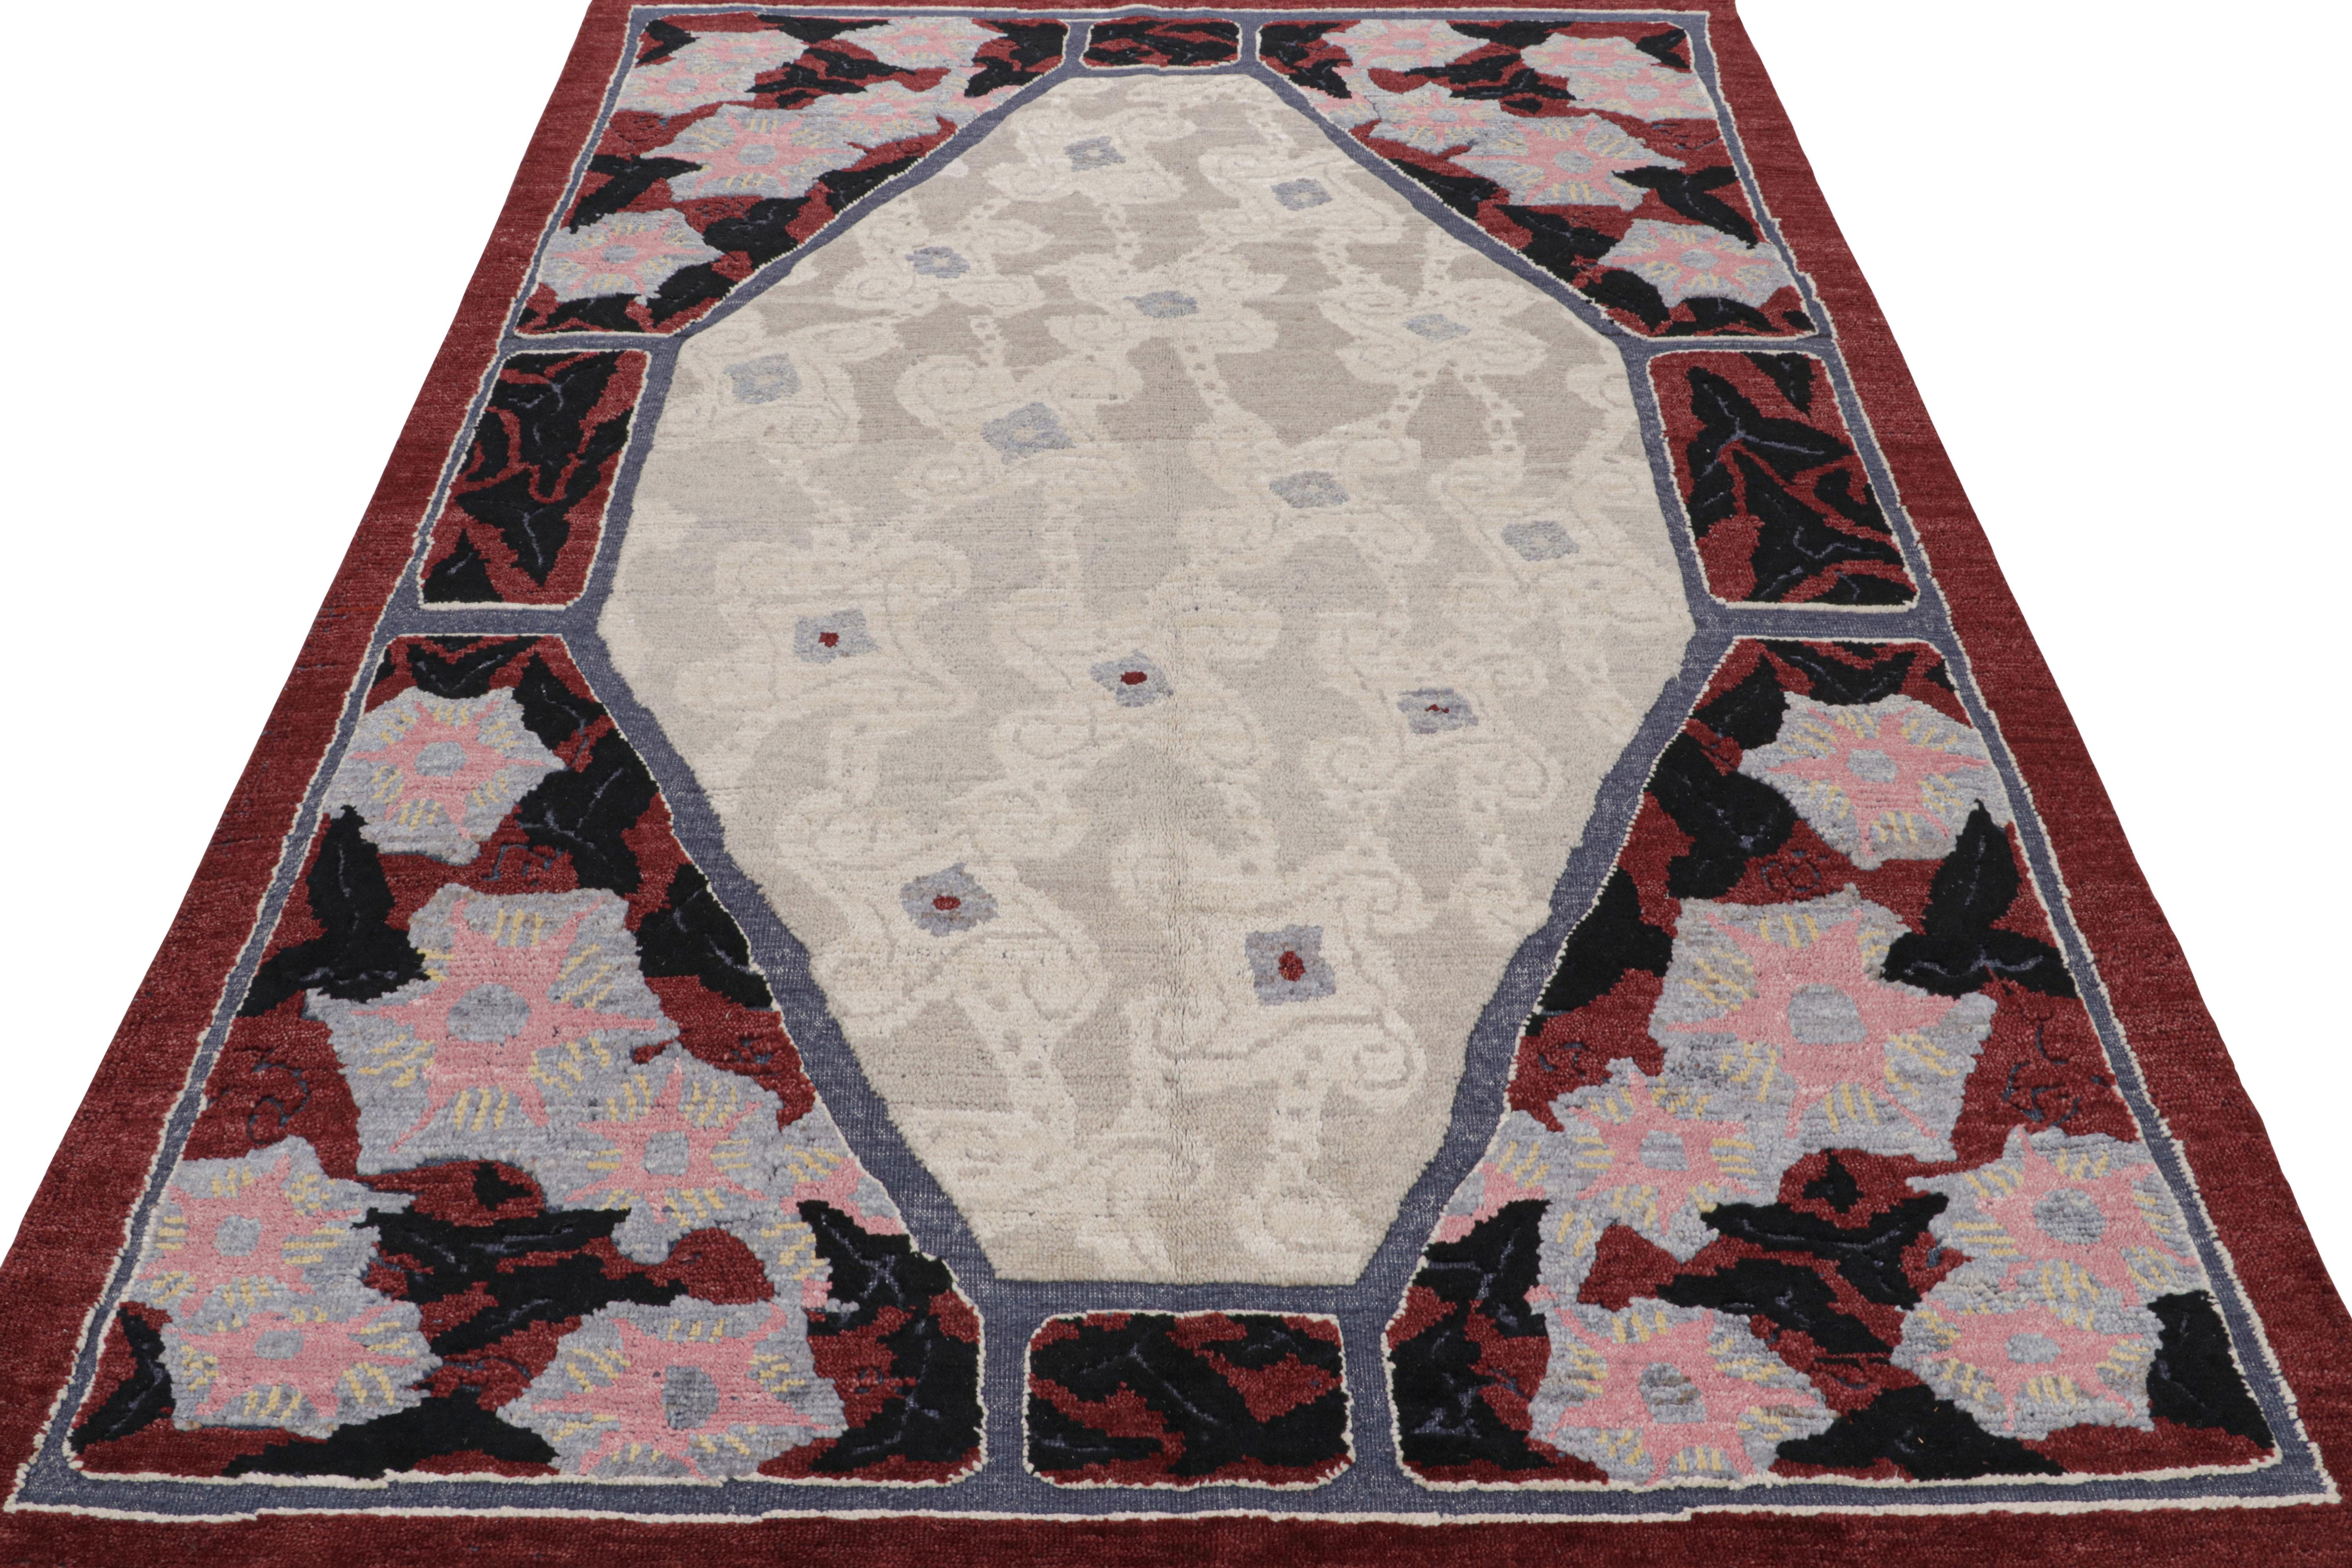 Indien Rug & Kilim's French Art Deco Rug with with Beige and Red Geometric Patterns (Rug & Kilim's French Art Deco Rug's French Art Deco Rug's French Art Deco Rug's French Art Deco Patterns (Rug & Kilim's French Art Deco Rug's French Art Deco Patterns)  en vente